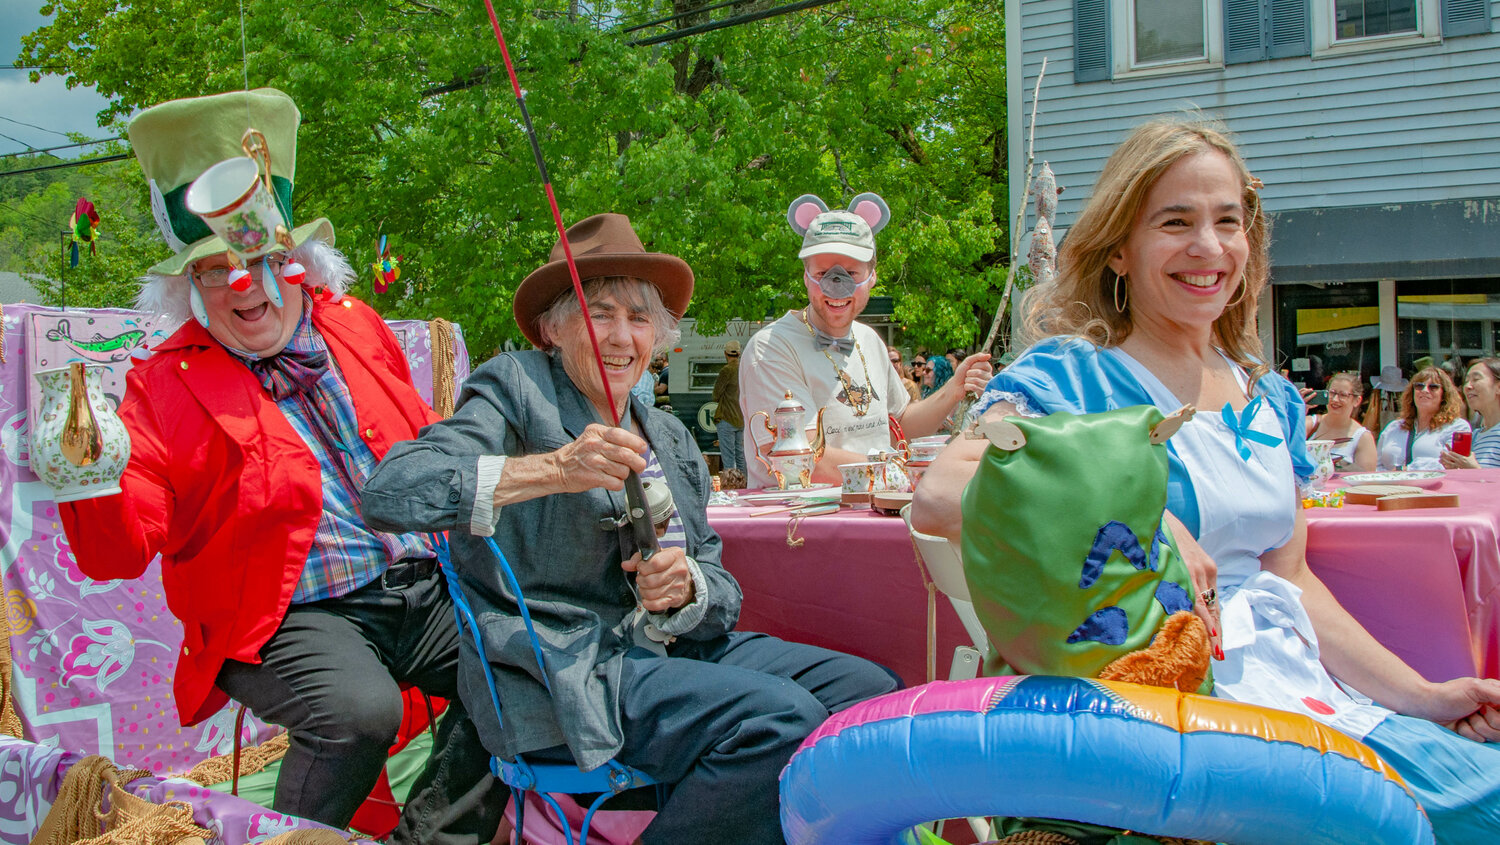 “Once Upon a Trout” was this year's Livingston Manor Trout Parade theme. Check out WJFF Radio Catskill's team floating down Main Street with a fishy "Alice in Wonderland" tableau. Bravo!